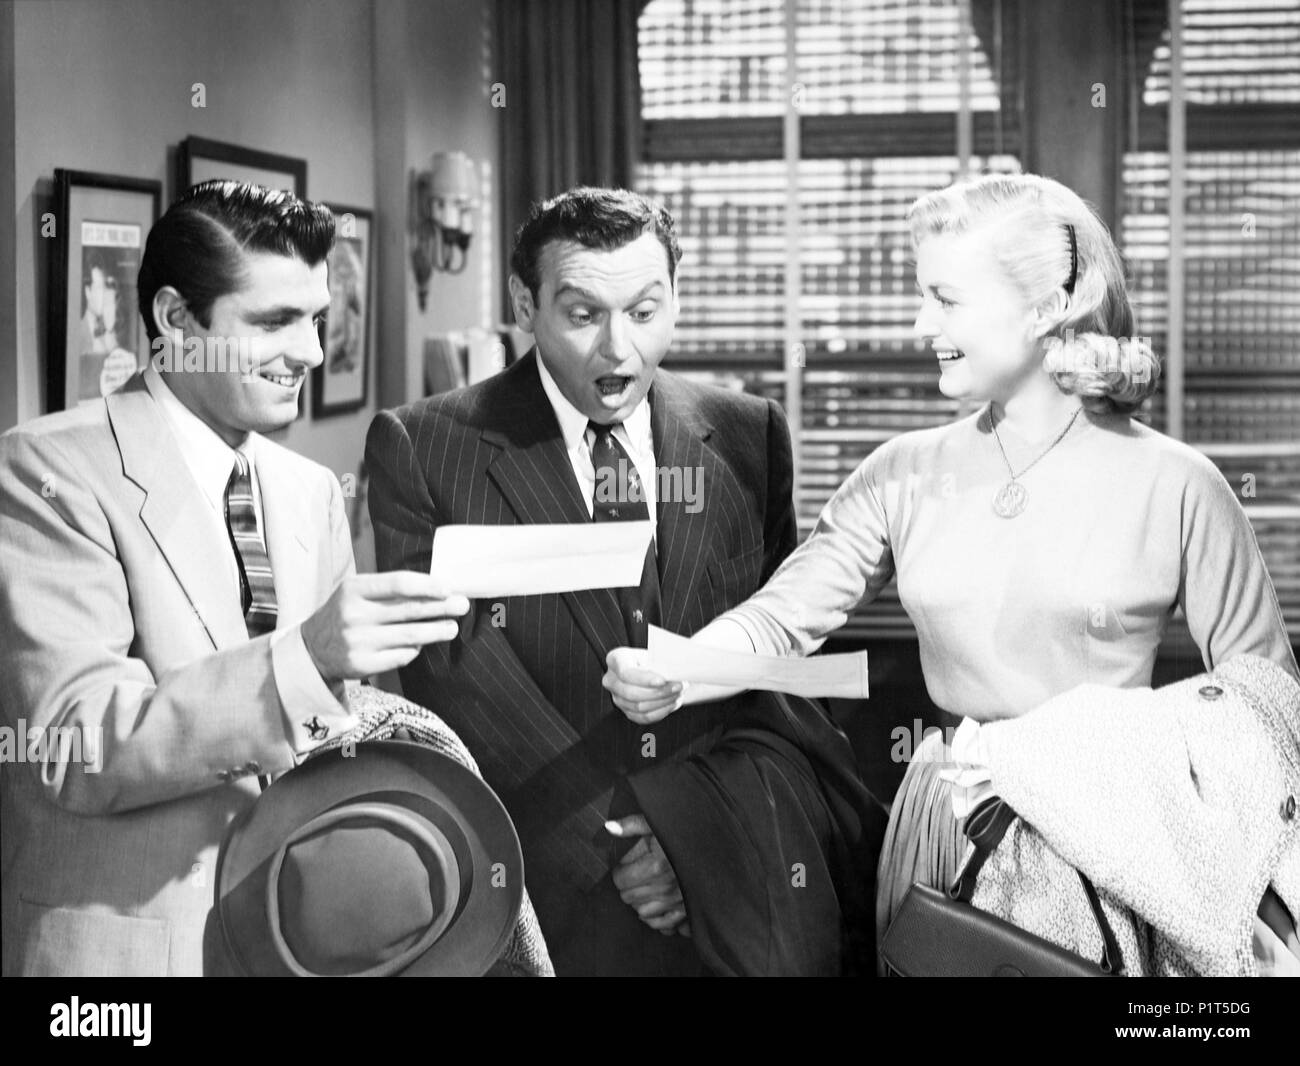 Original Film Title: BRING YOUR SMILE ALONG.  English Title: BRING YOUR SMILE ALONG.  Film Director: BLAKE EDWARDS.  Year: 1955.  Stars: CONSTANCE TOWERS; FRANKIE LAINE; KEEFE BRASSELLE. Credit: COLUMBIA PICTURES / Album Stock Photo